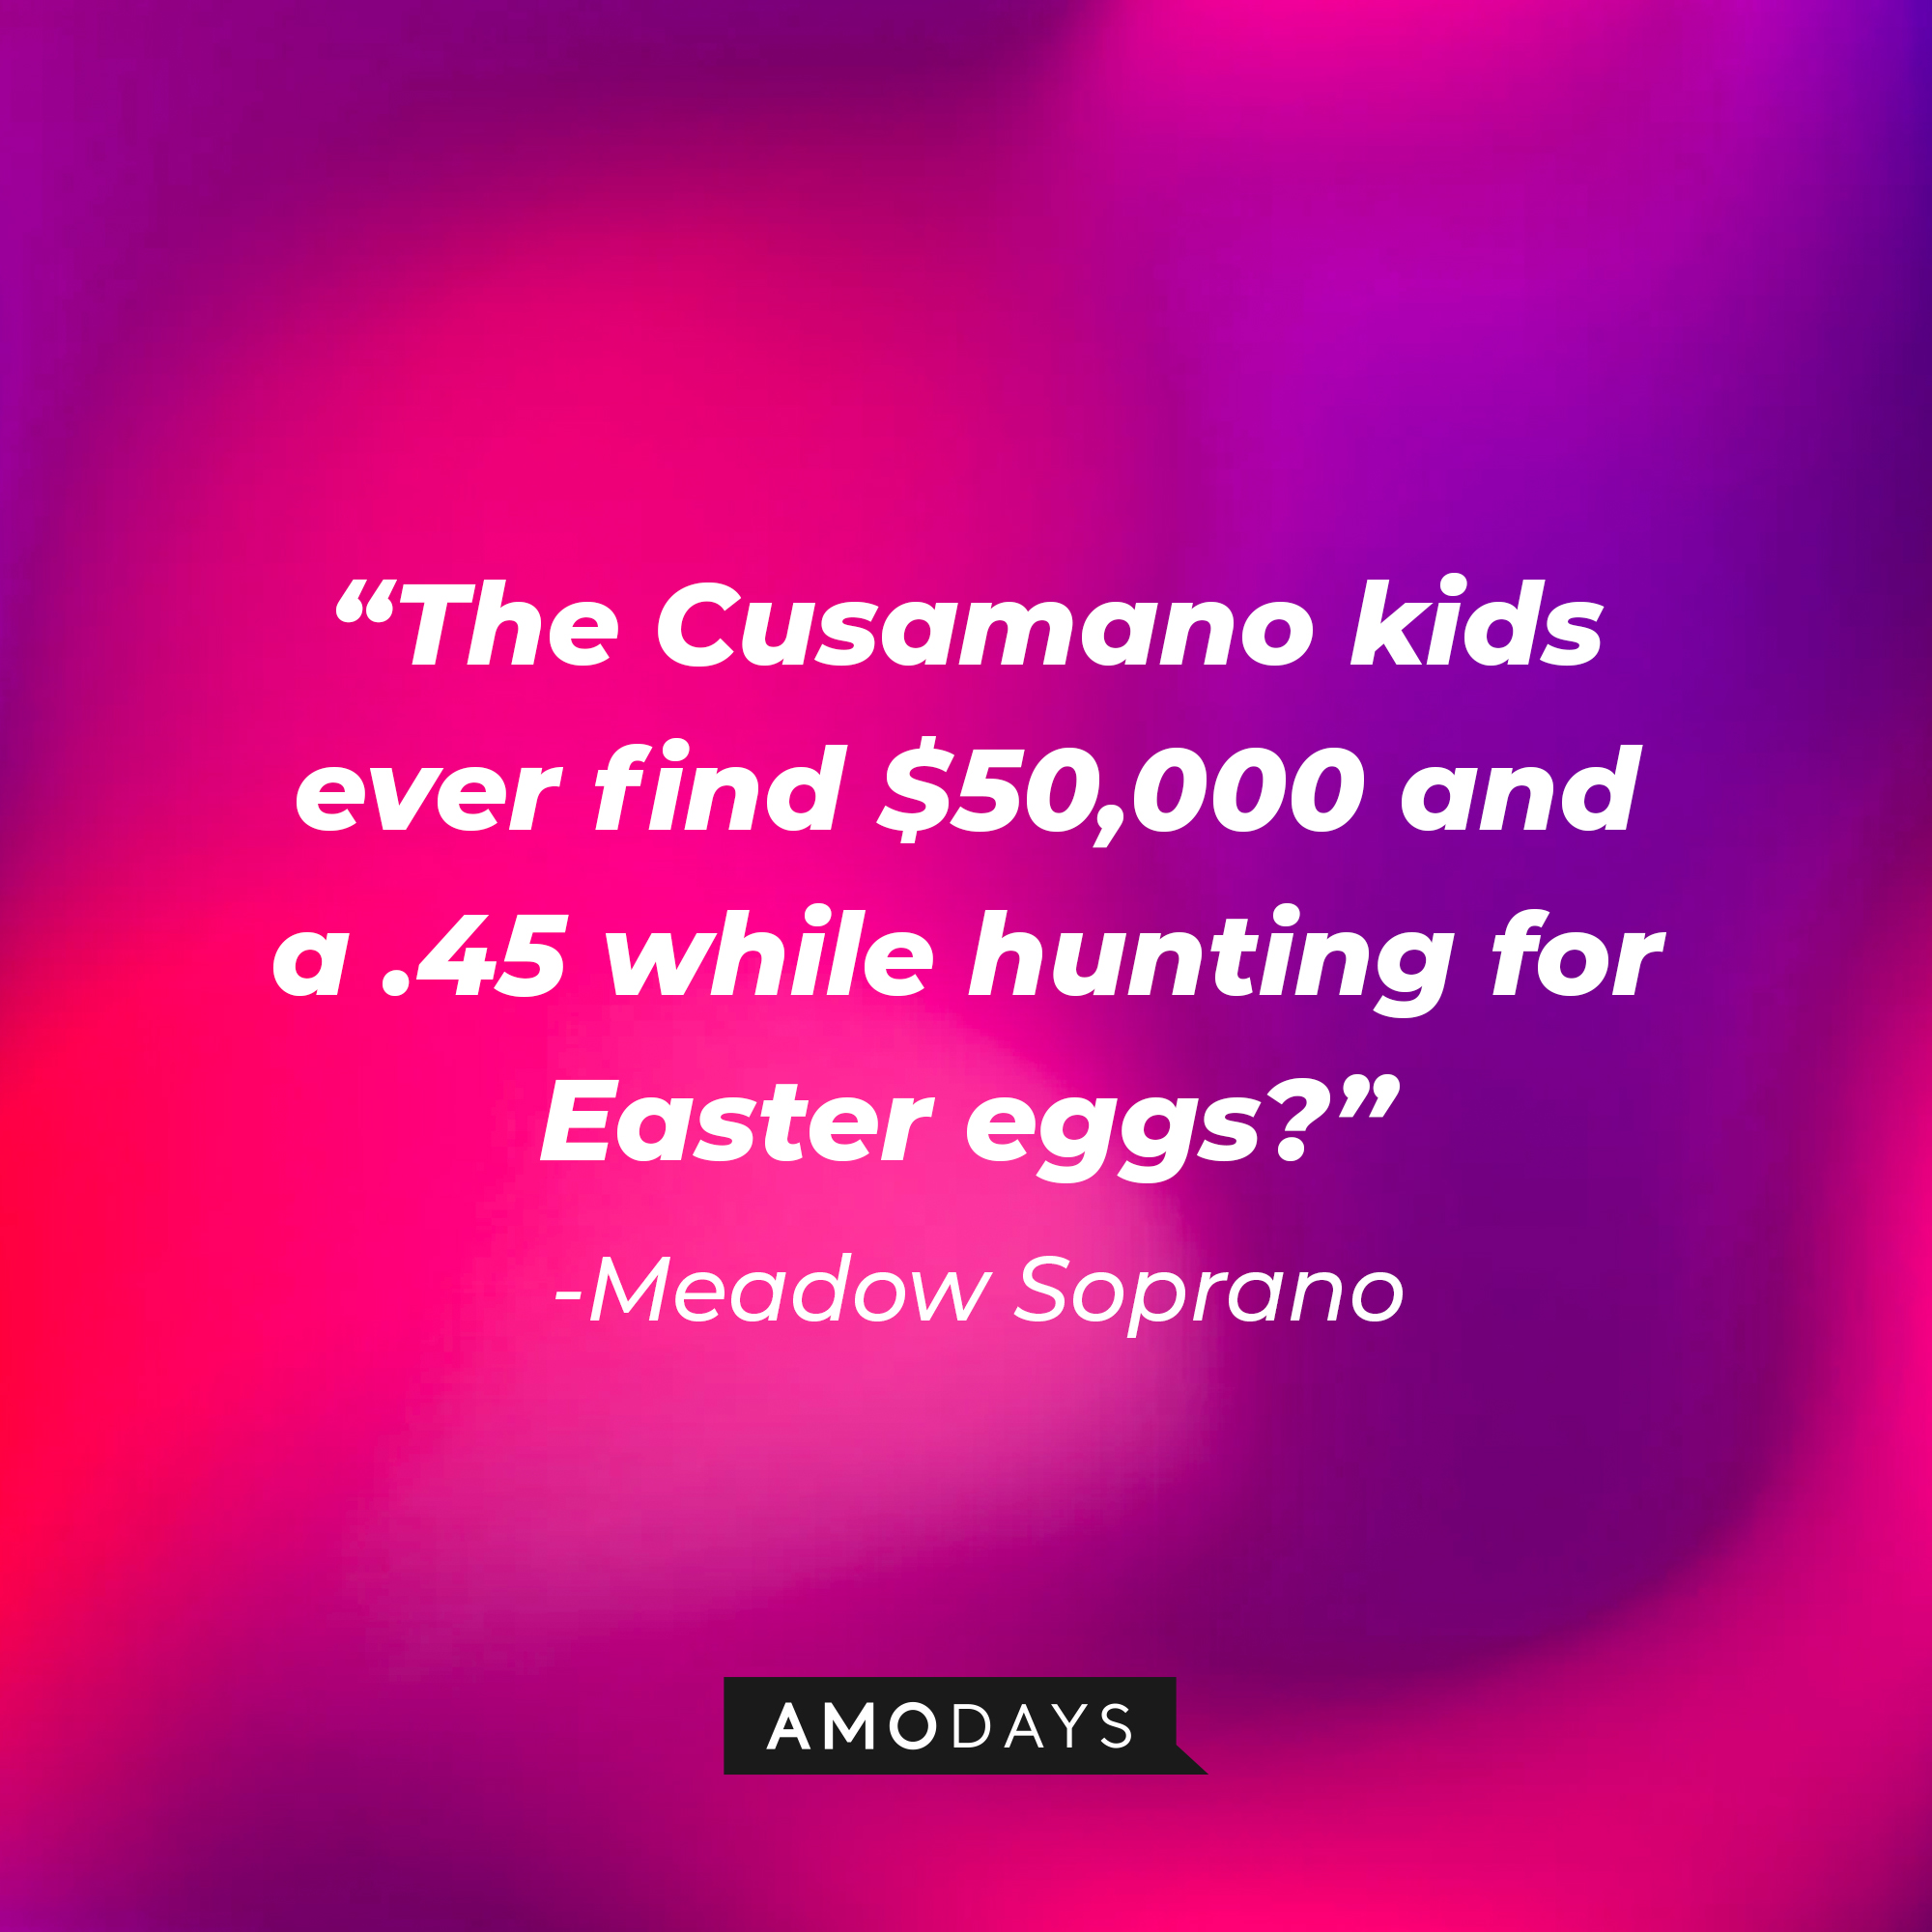 Meadow Soprano’s quote: "The Cusamano kids ever find $50,000 and a .45 while hunting for Easter eggs?” | Source: AmoDays